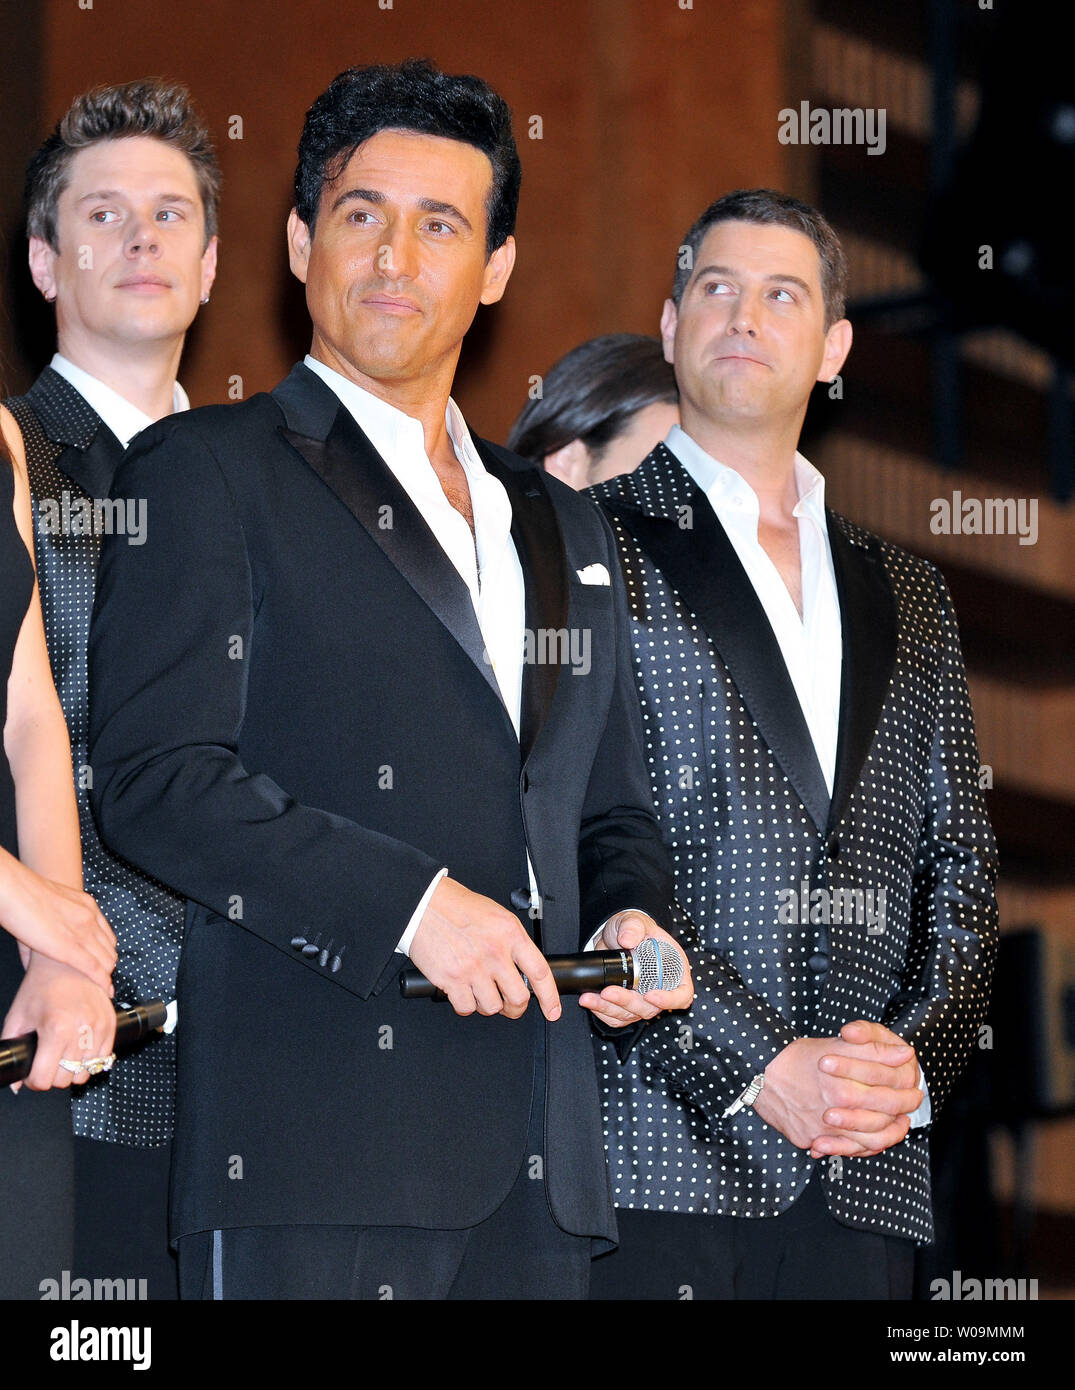 L-R)Il Divo's David Miller, Carlos Marin, Sebastien Izambard attend a  premiere for the Japanese film "Andalsia" in Tokyo, Japan, on June 8, 2011.  They sing "Time to Say Goodbye" for this film.